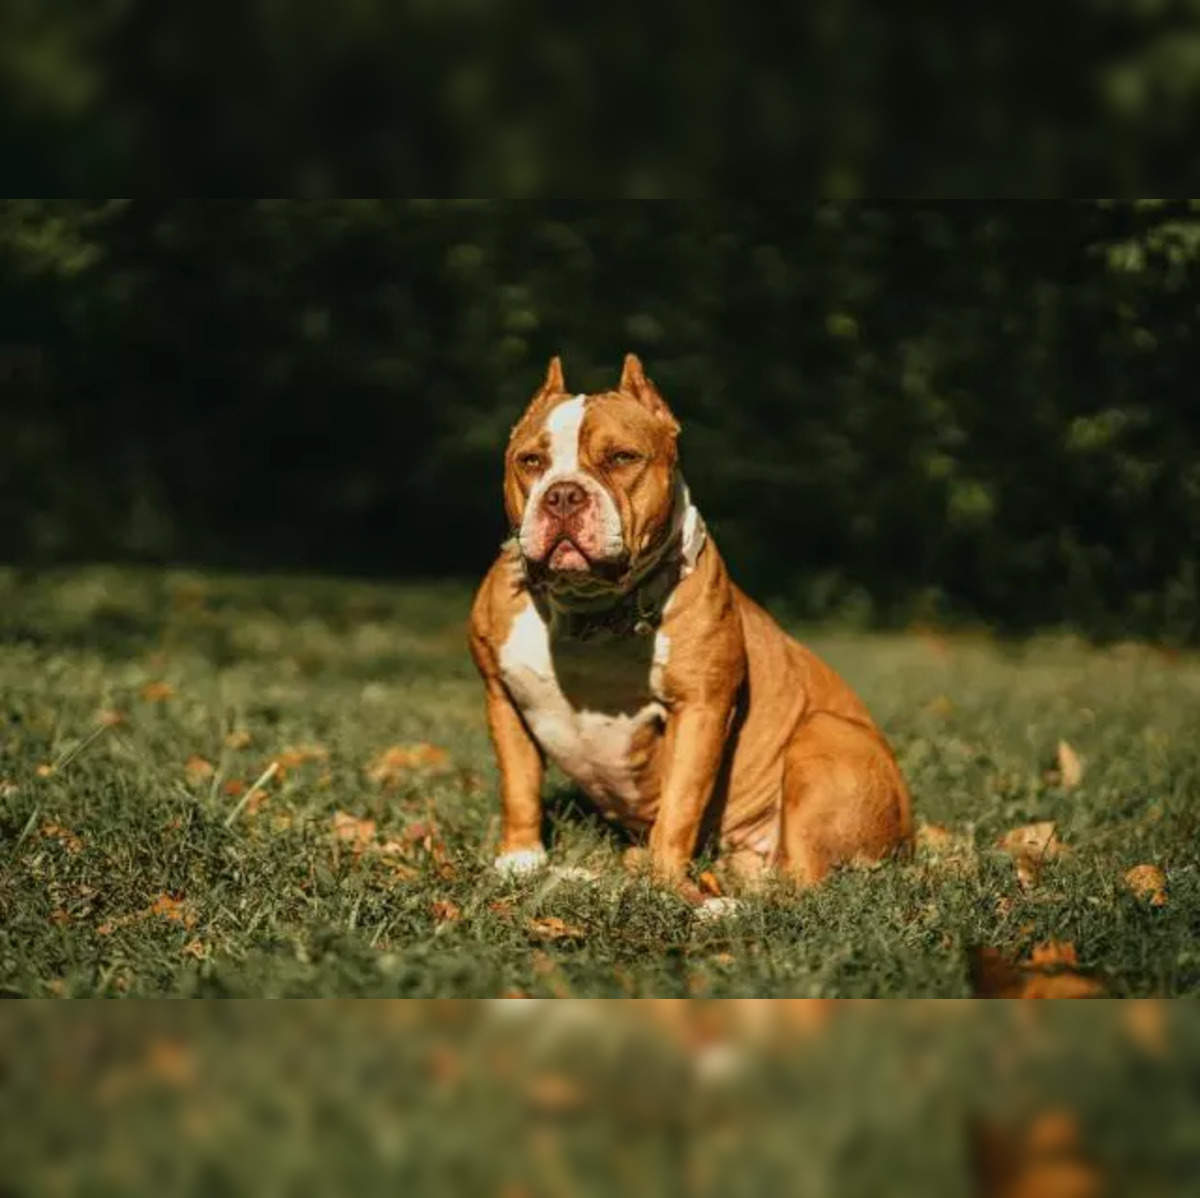 5 Different Types of American Bully - Which One is Yours? 